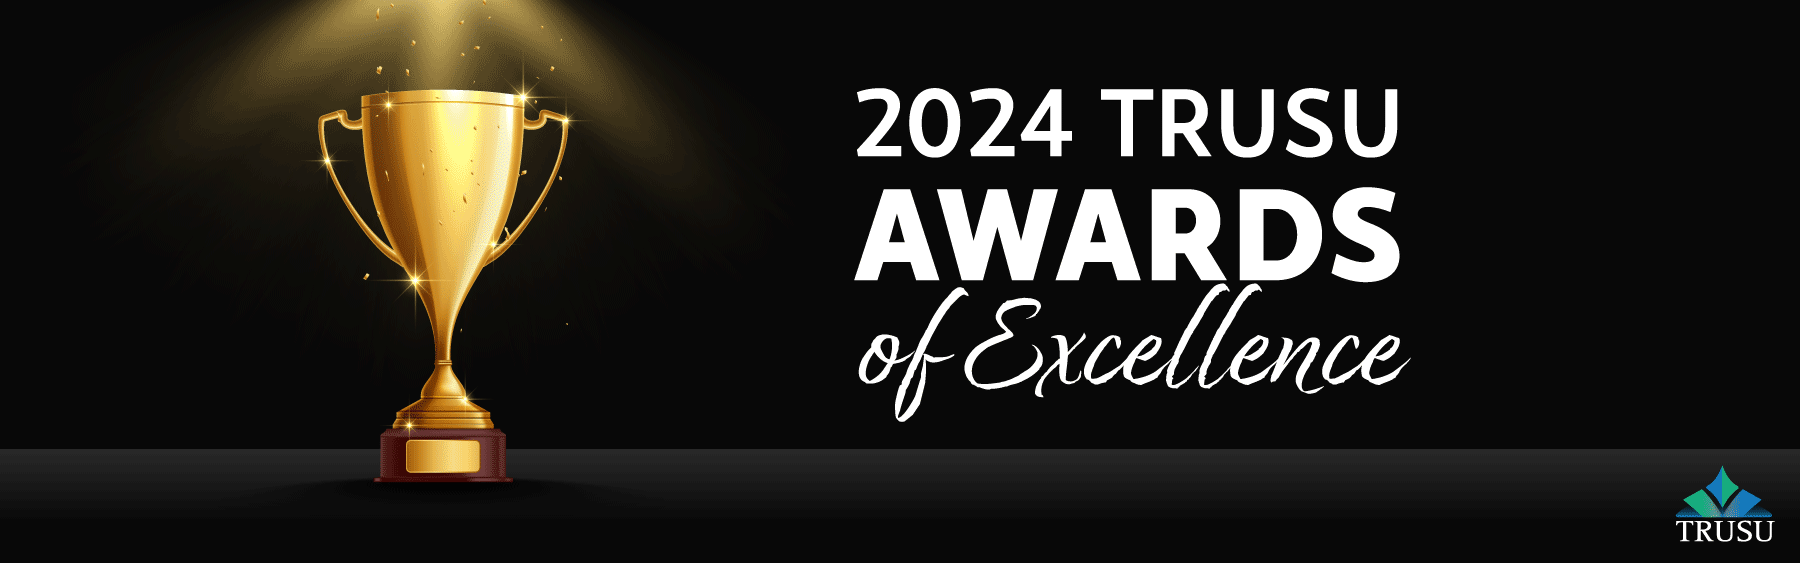 TRUSU Awards of Excellence 2024